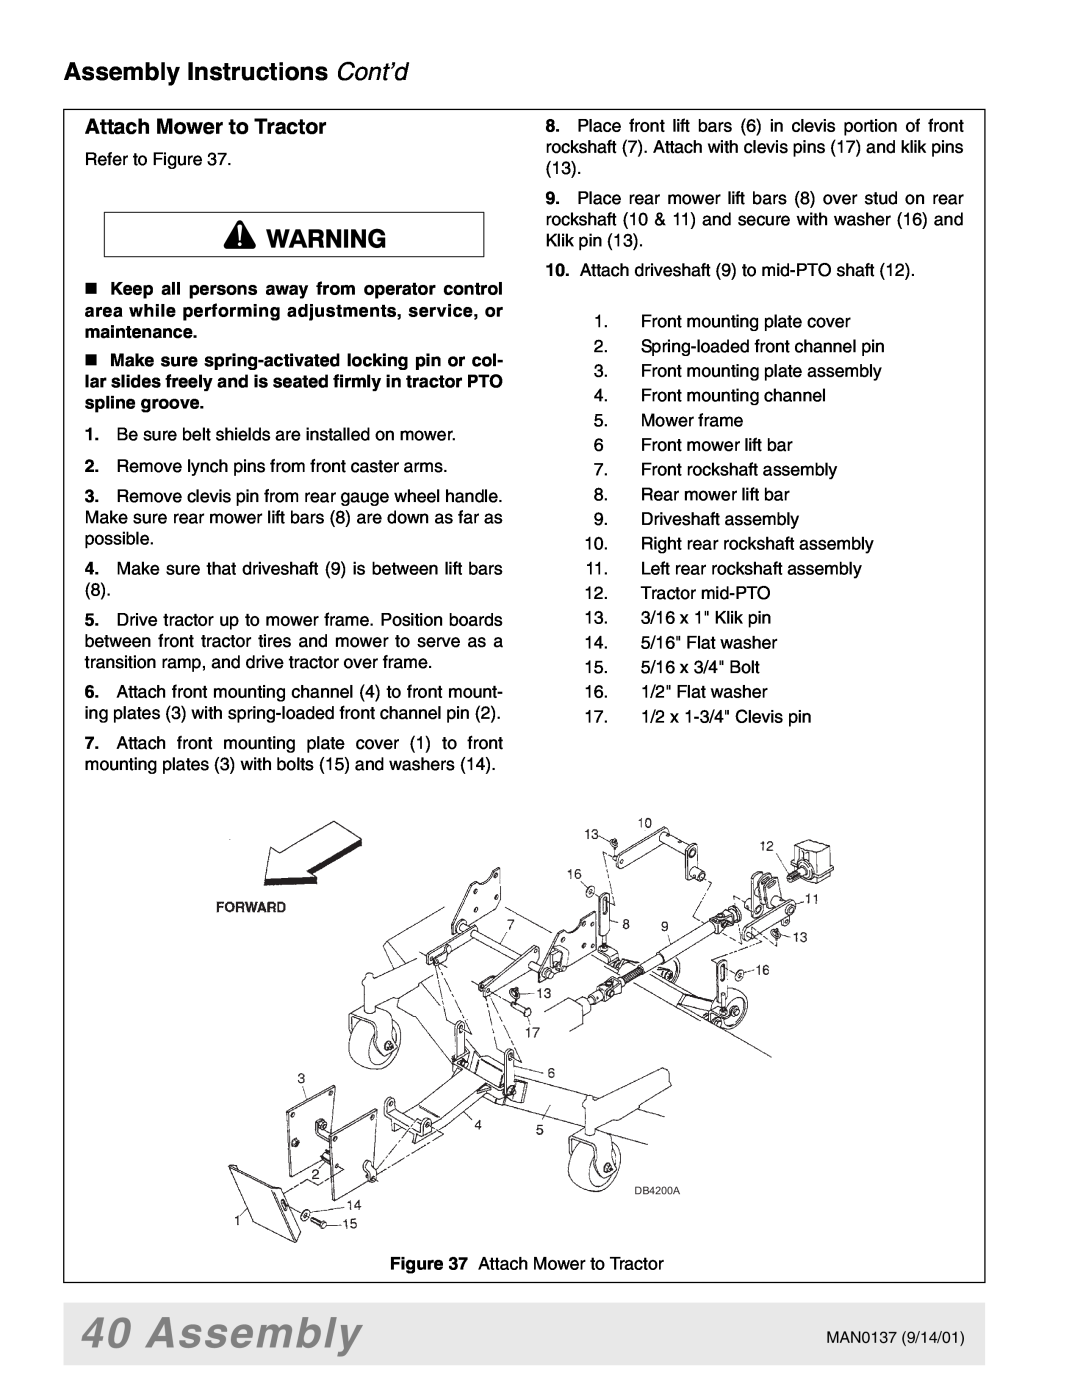 Woods Equipment 7000, 7192, 7194, 7195, 7200, 7205 manual Attach Mower to Tractor, Assembly Instructions Cont’d 